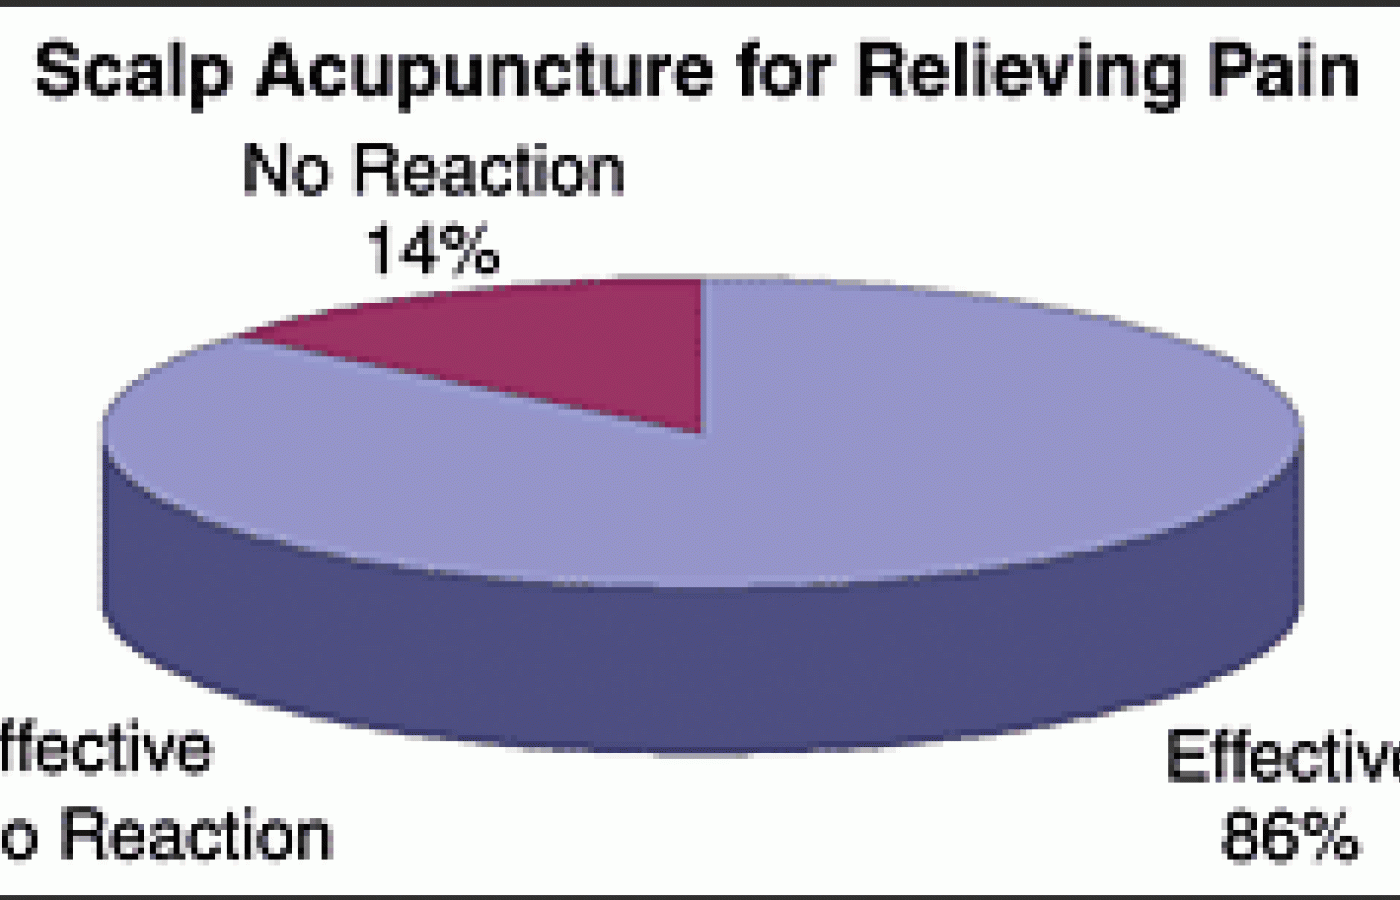 Scalp acupuncture for relieving pain pie chart.